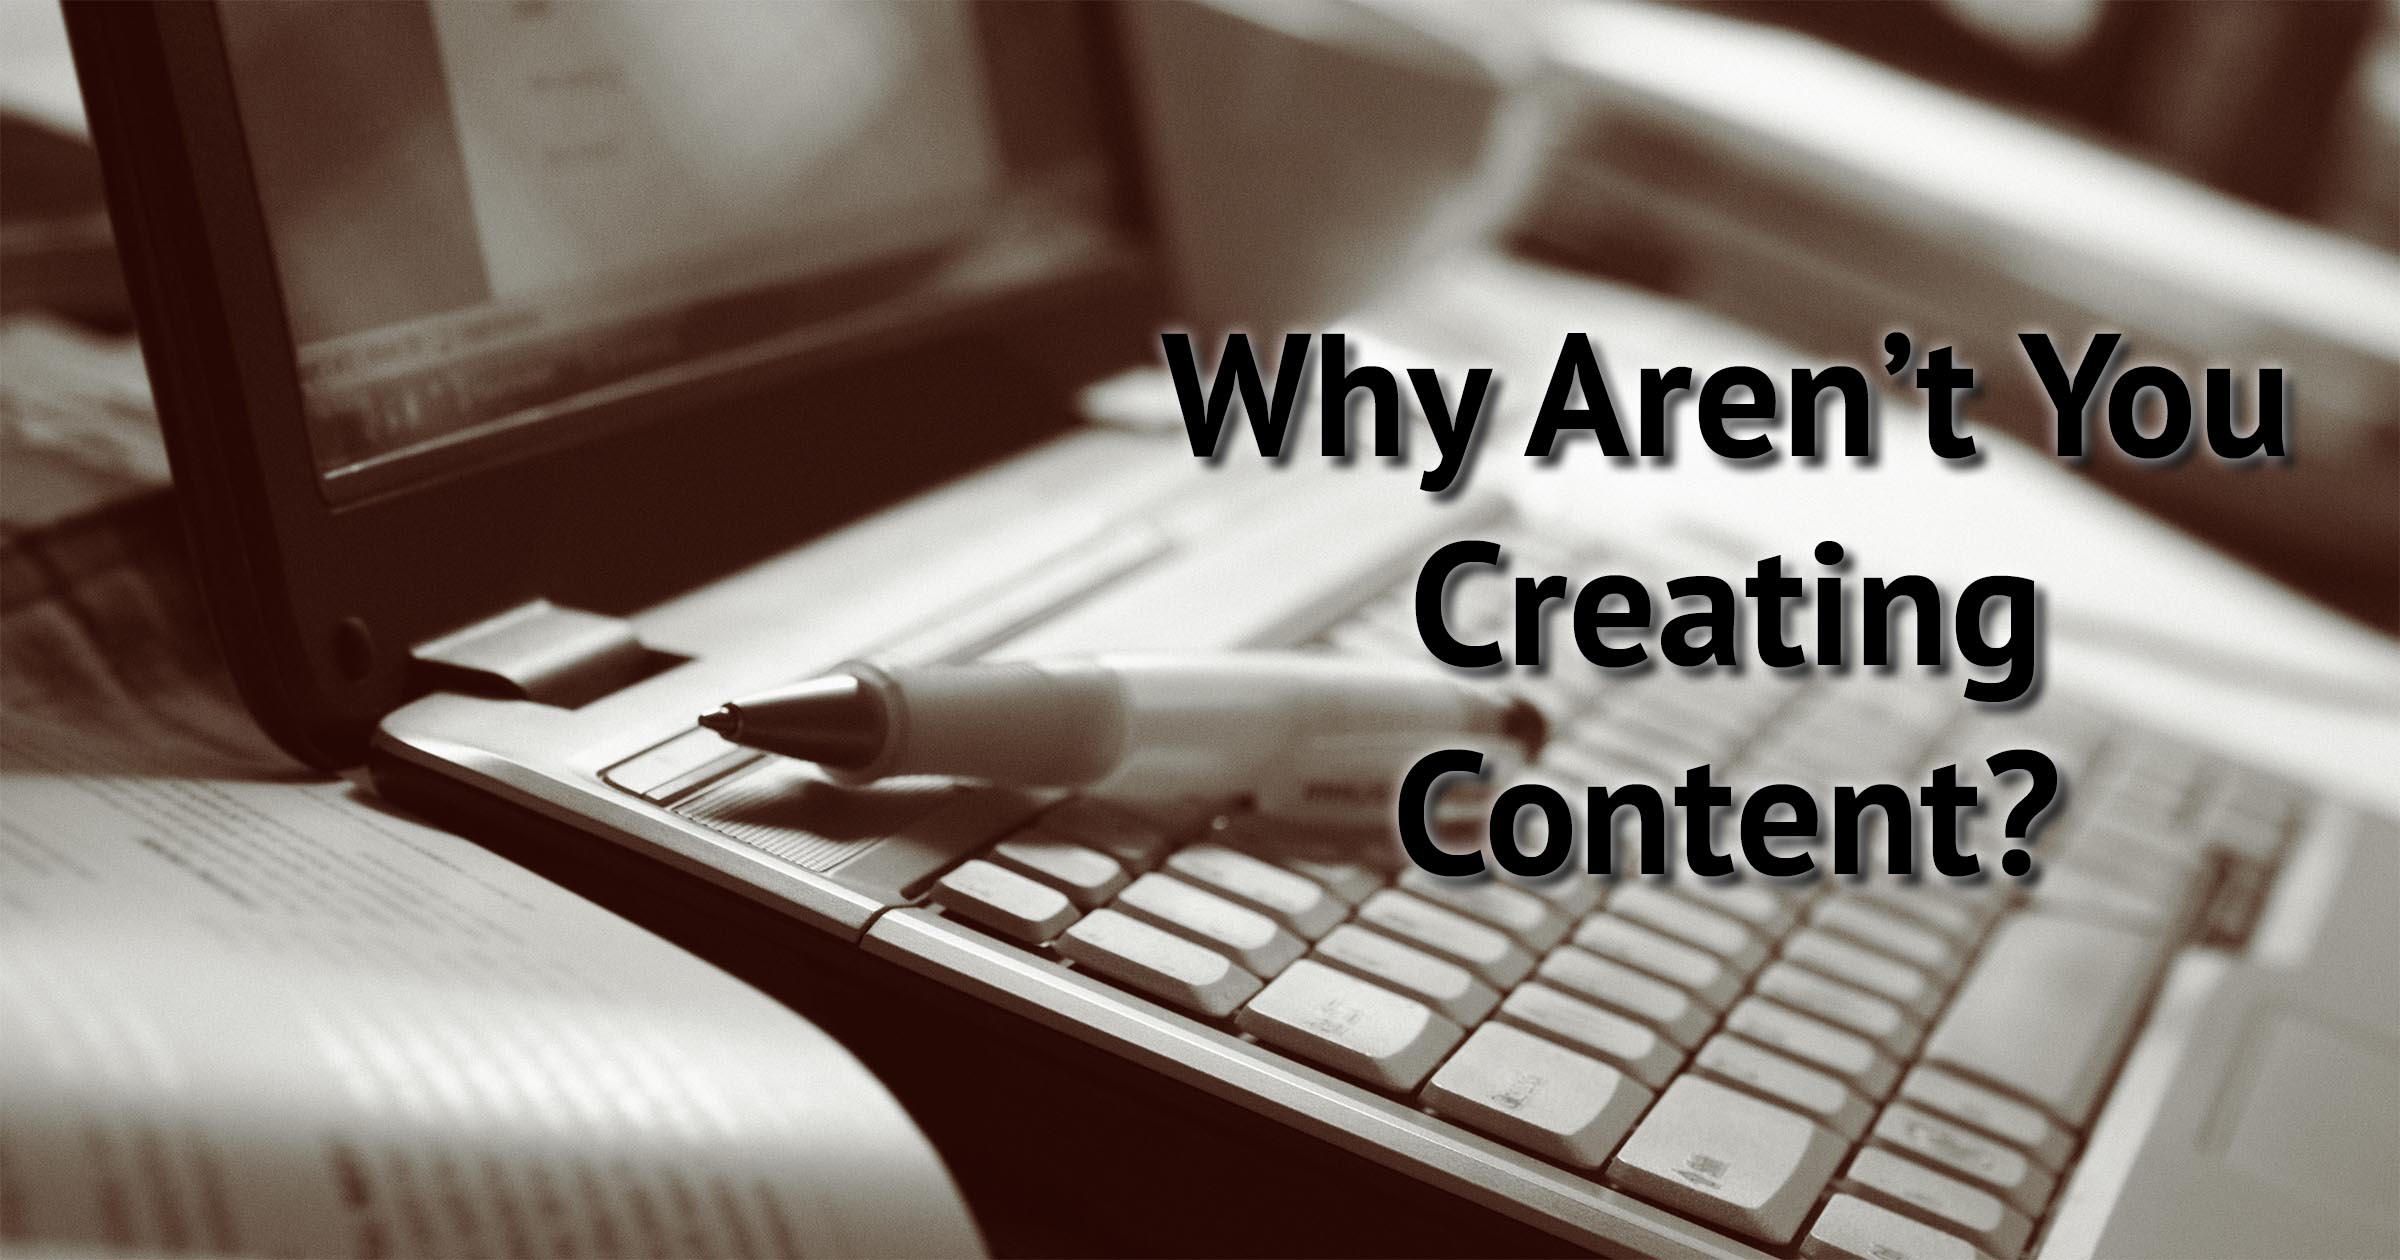 Why Aren't You Creating Content?